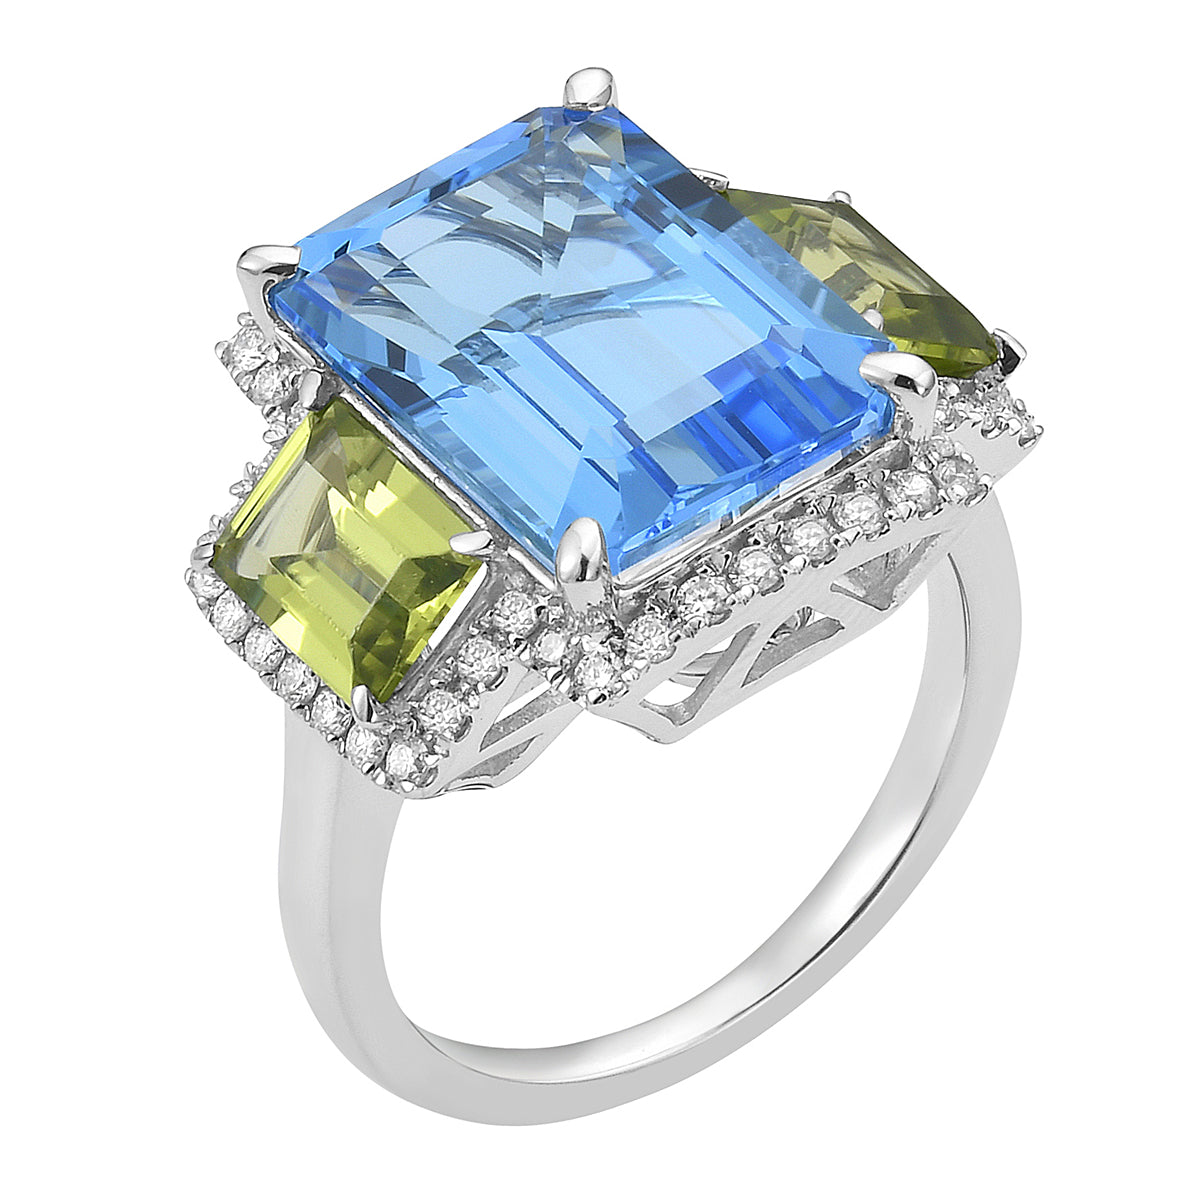 Ring 14KW/5.3G 1SWBT-9.68CT 2PER-2.01CT 46RD-0.36CT SWBT/Periodt